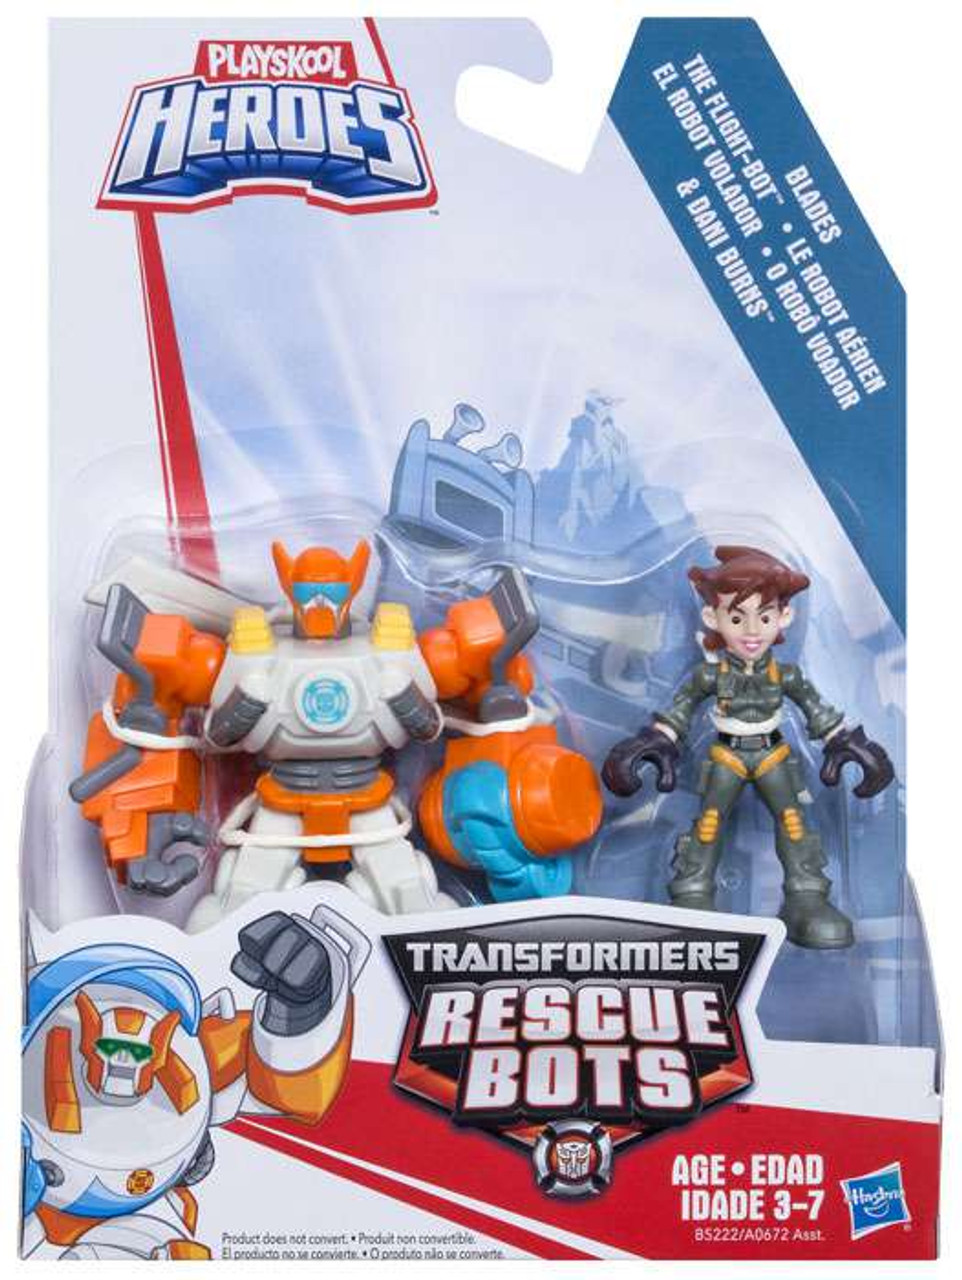 Transformers Rescue Bots Playskool Heroes Blades The Copter Bot Dani